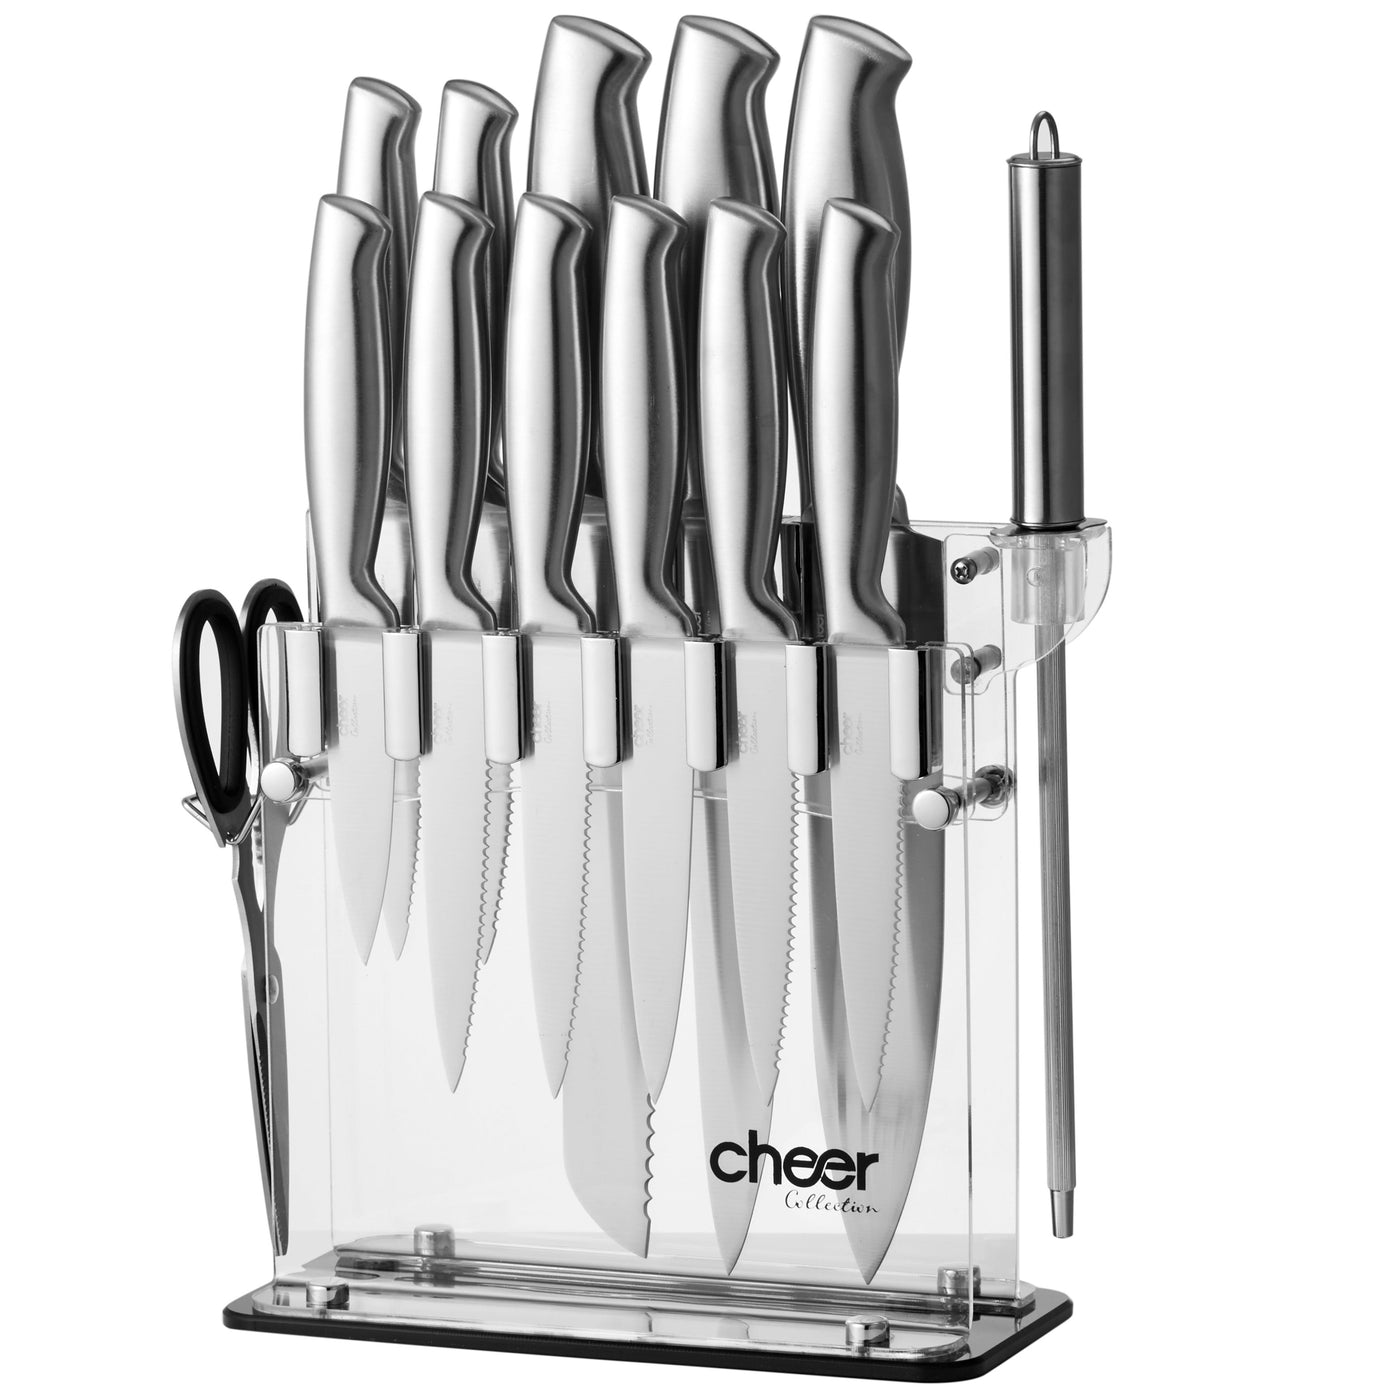 Knives Set Serrated Stainless Steel Steak Kitchen Chef Cutlery Sharp Knifes